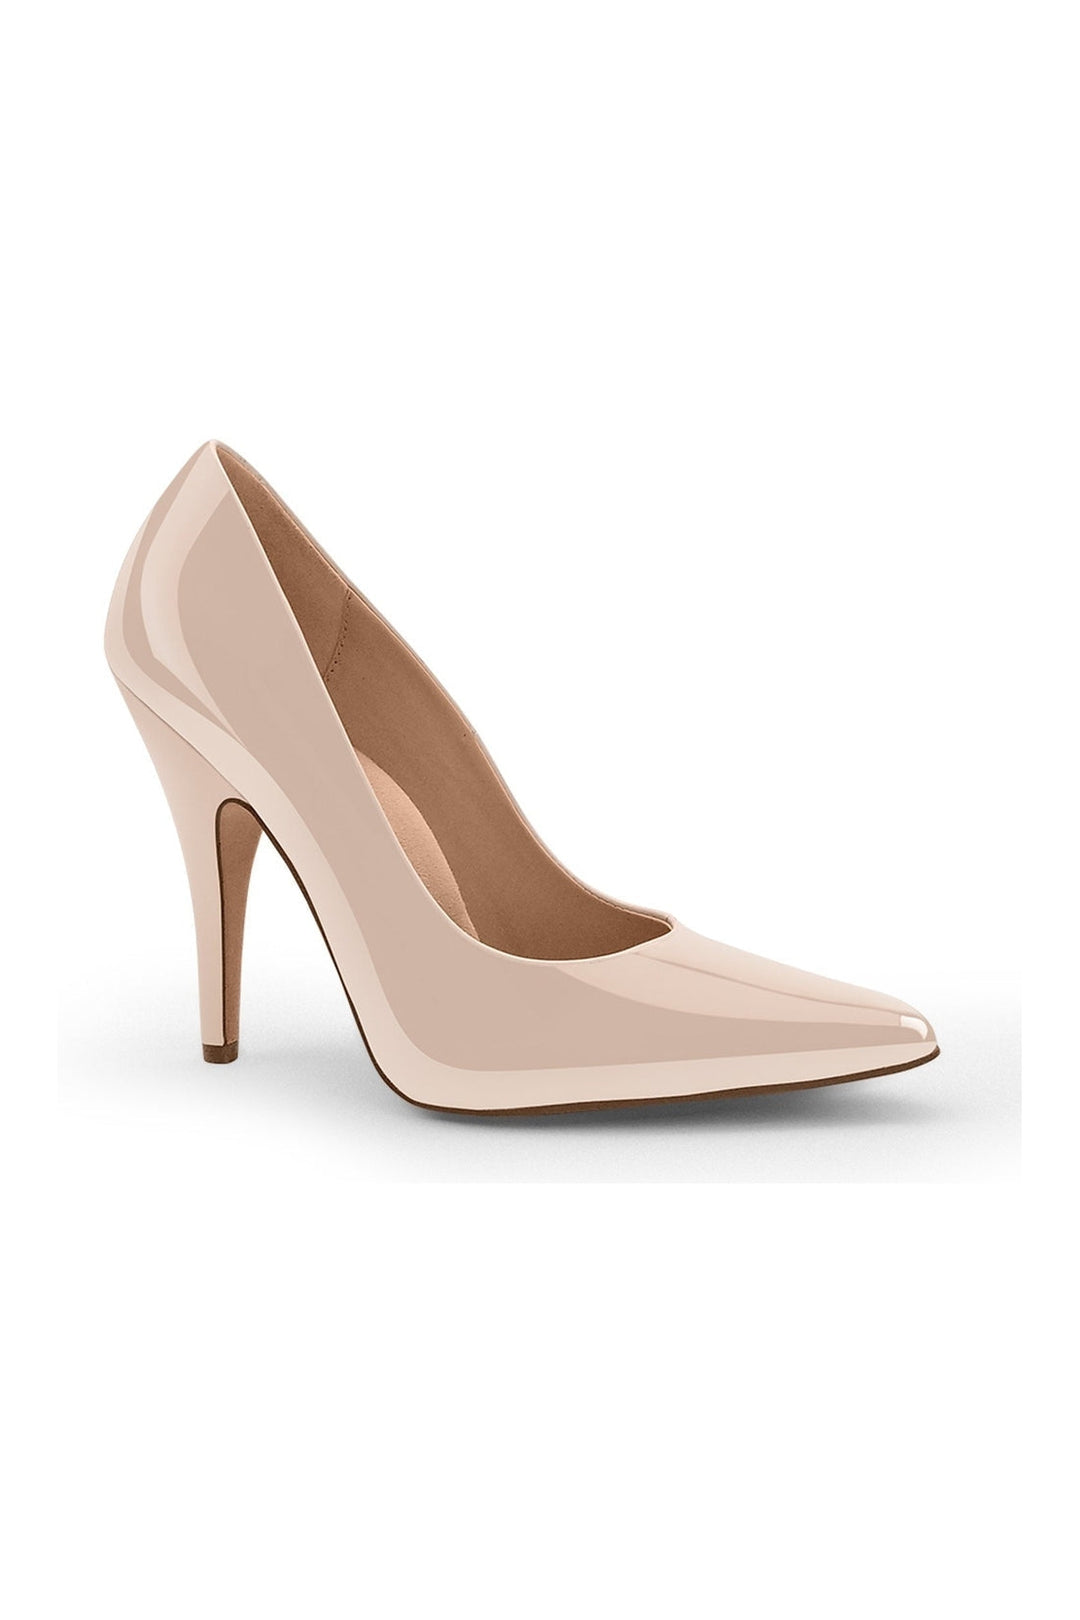 Classic Sexy Wide Width Pump-Pumps-Sexyshoes Signature-Nude-SEXYSHOES.COM